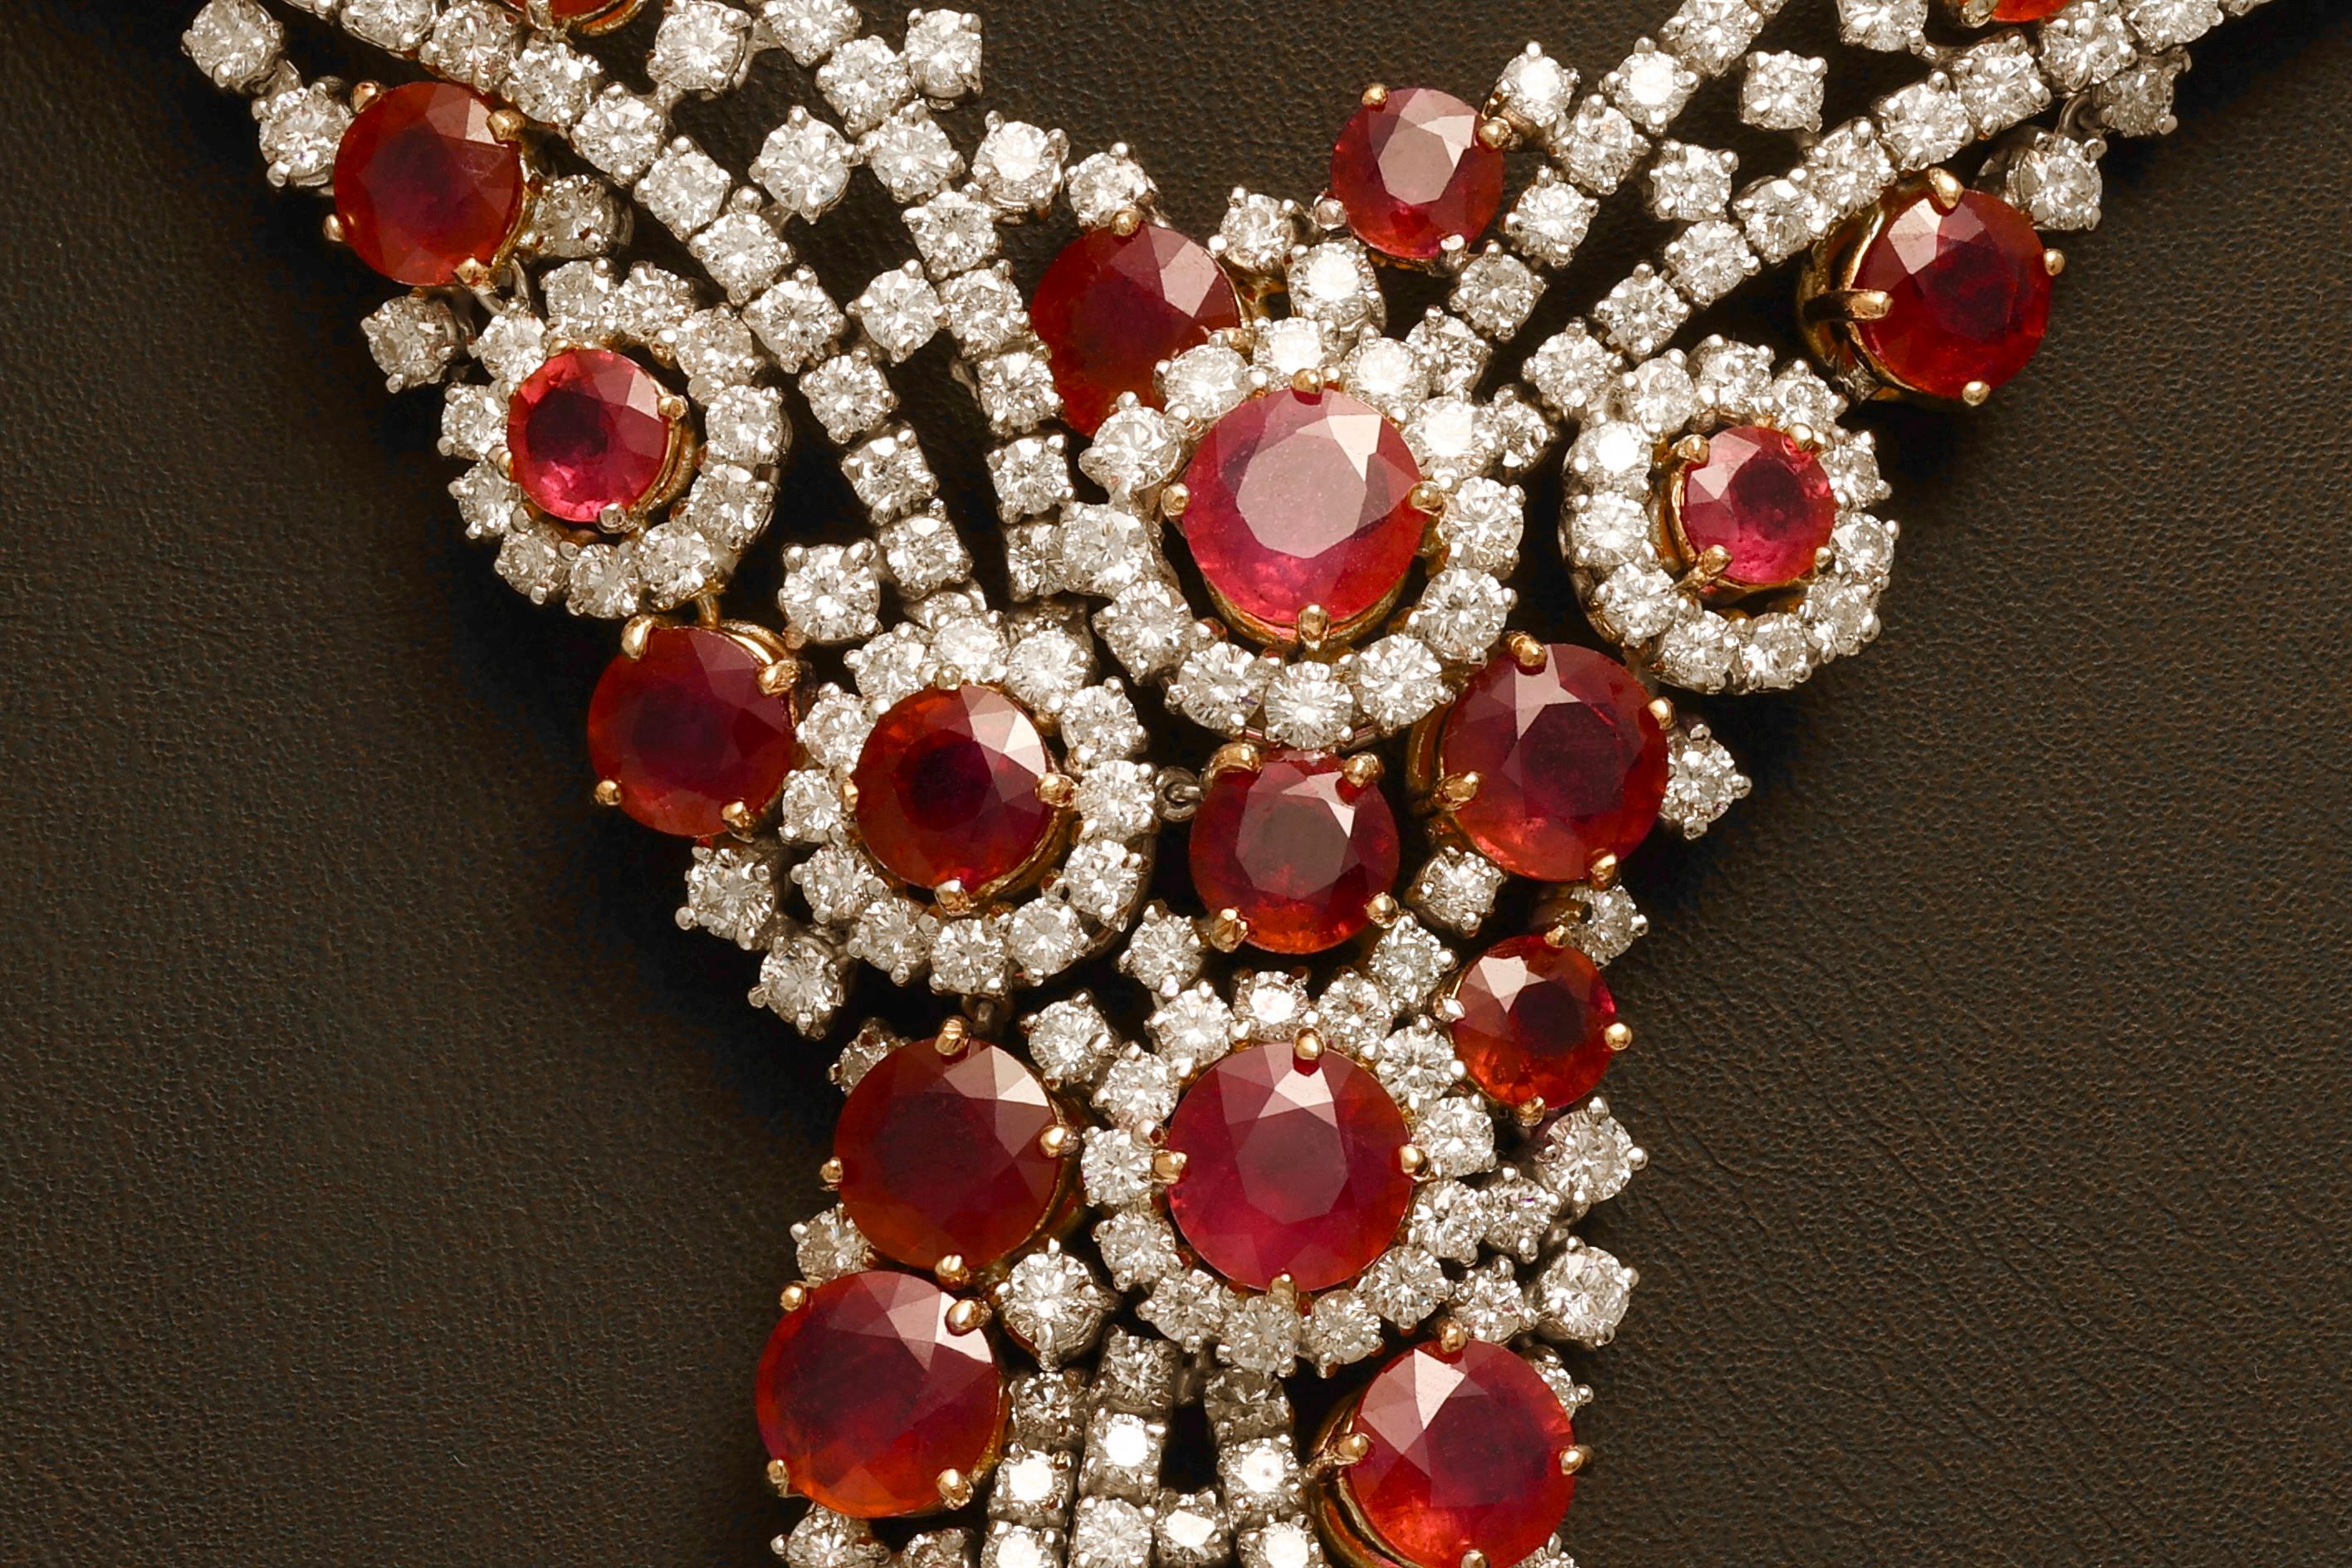 Set 18 kt. Gold Necklace, Earring, Ring, Bracelet, 116Ct Rubies & 105Ct Diamonds For Sale 2